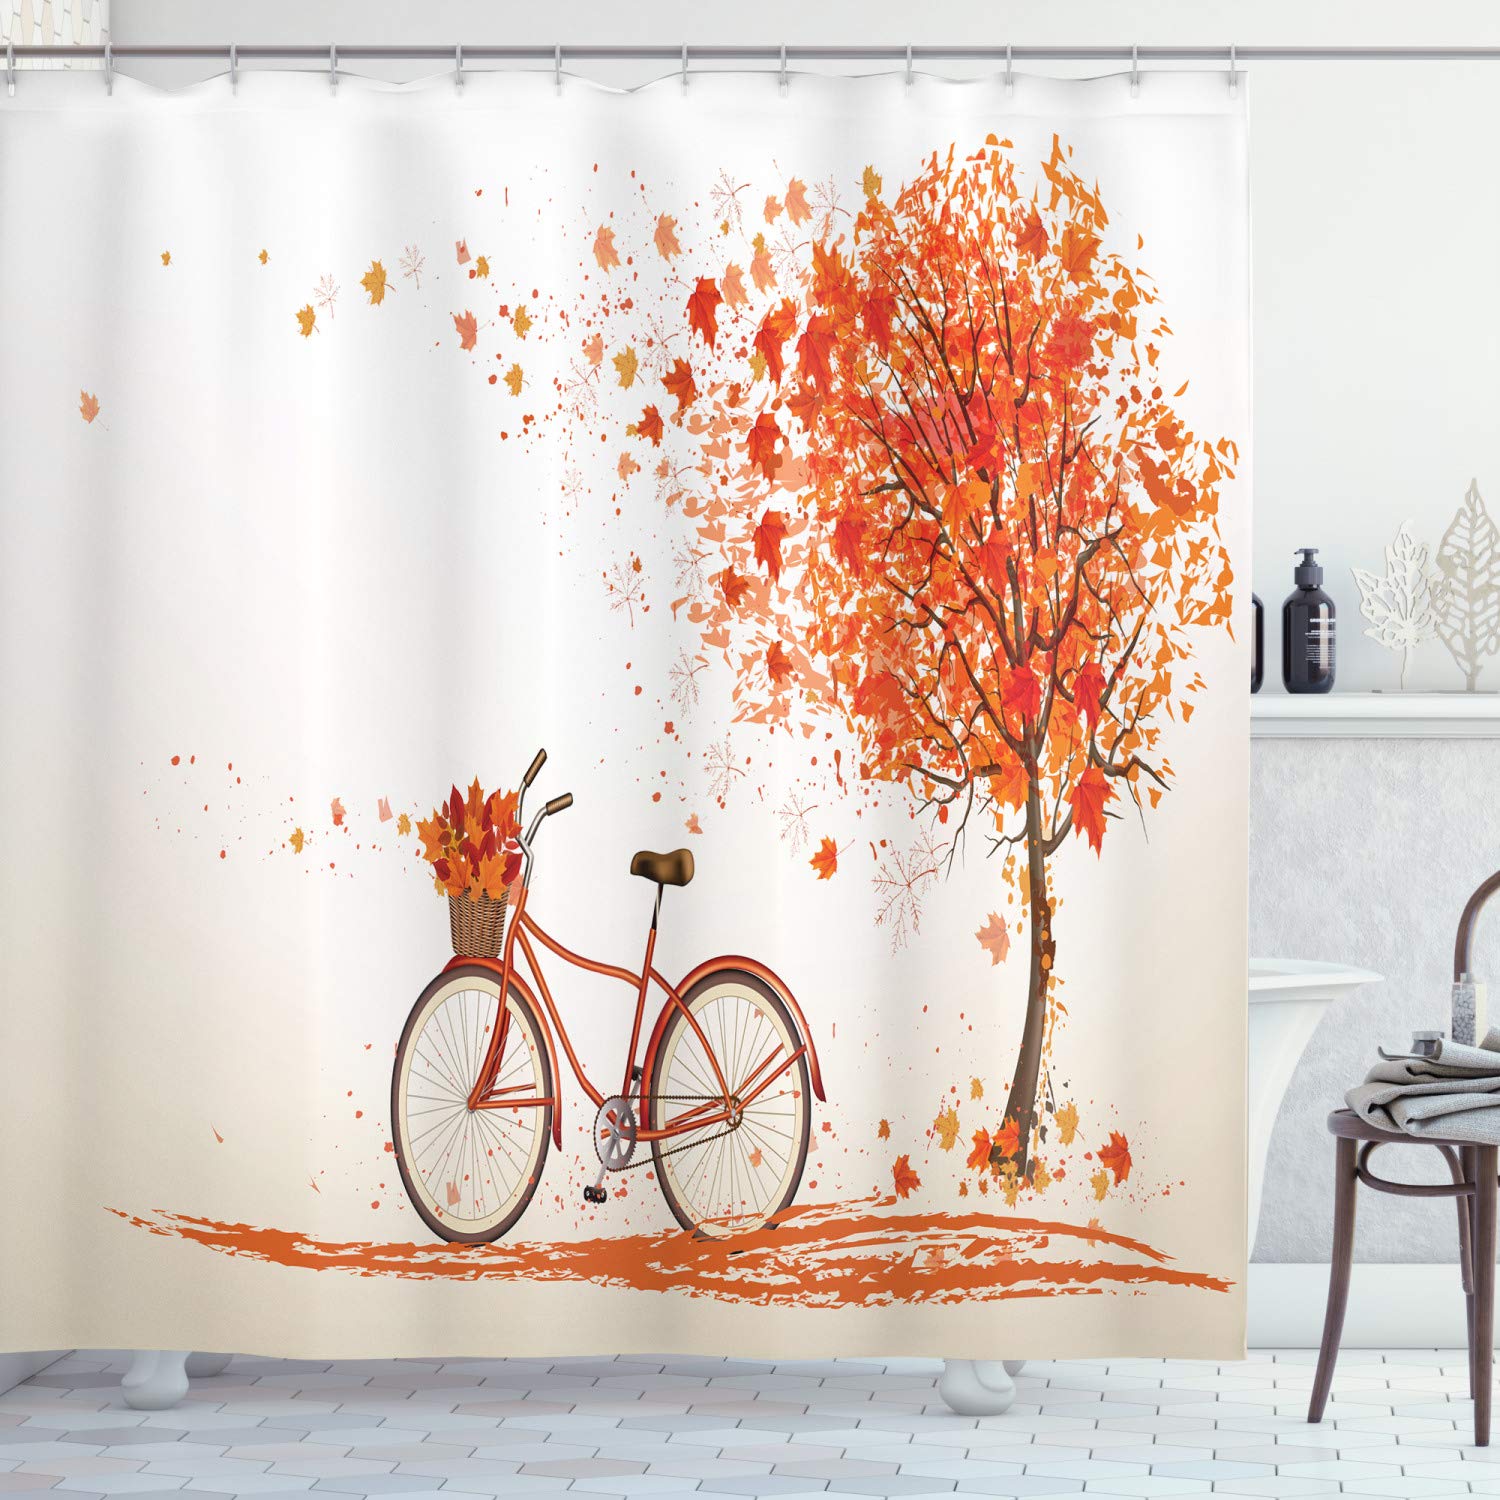 Ambesonne Bicycle Decor Collection, Autumn Tree with Aged Old Bike and Fall Tree November Day Fall Season Park Nature Home Decor, Polyester Fabric Bathroom Shower Curtain Set with Hooks, Orange